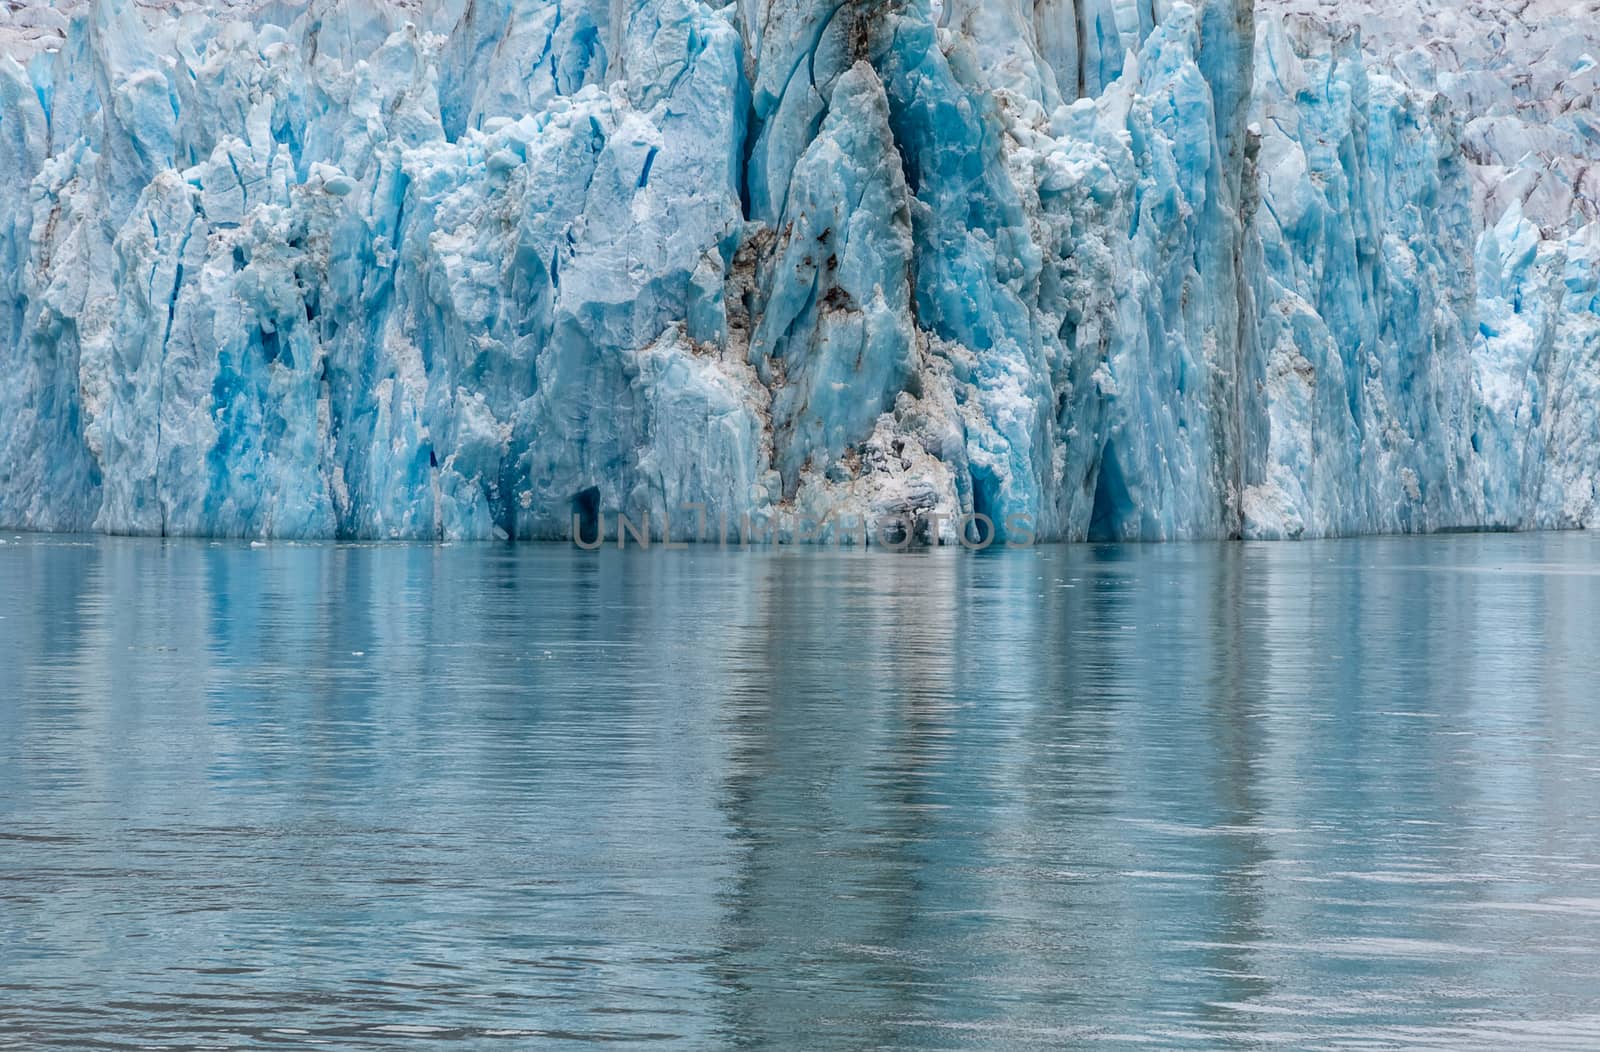 View of a glacier and its reflection in the water